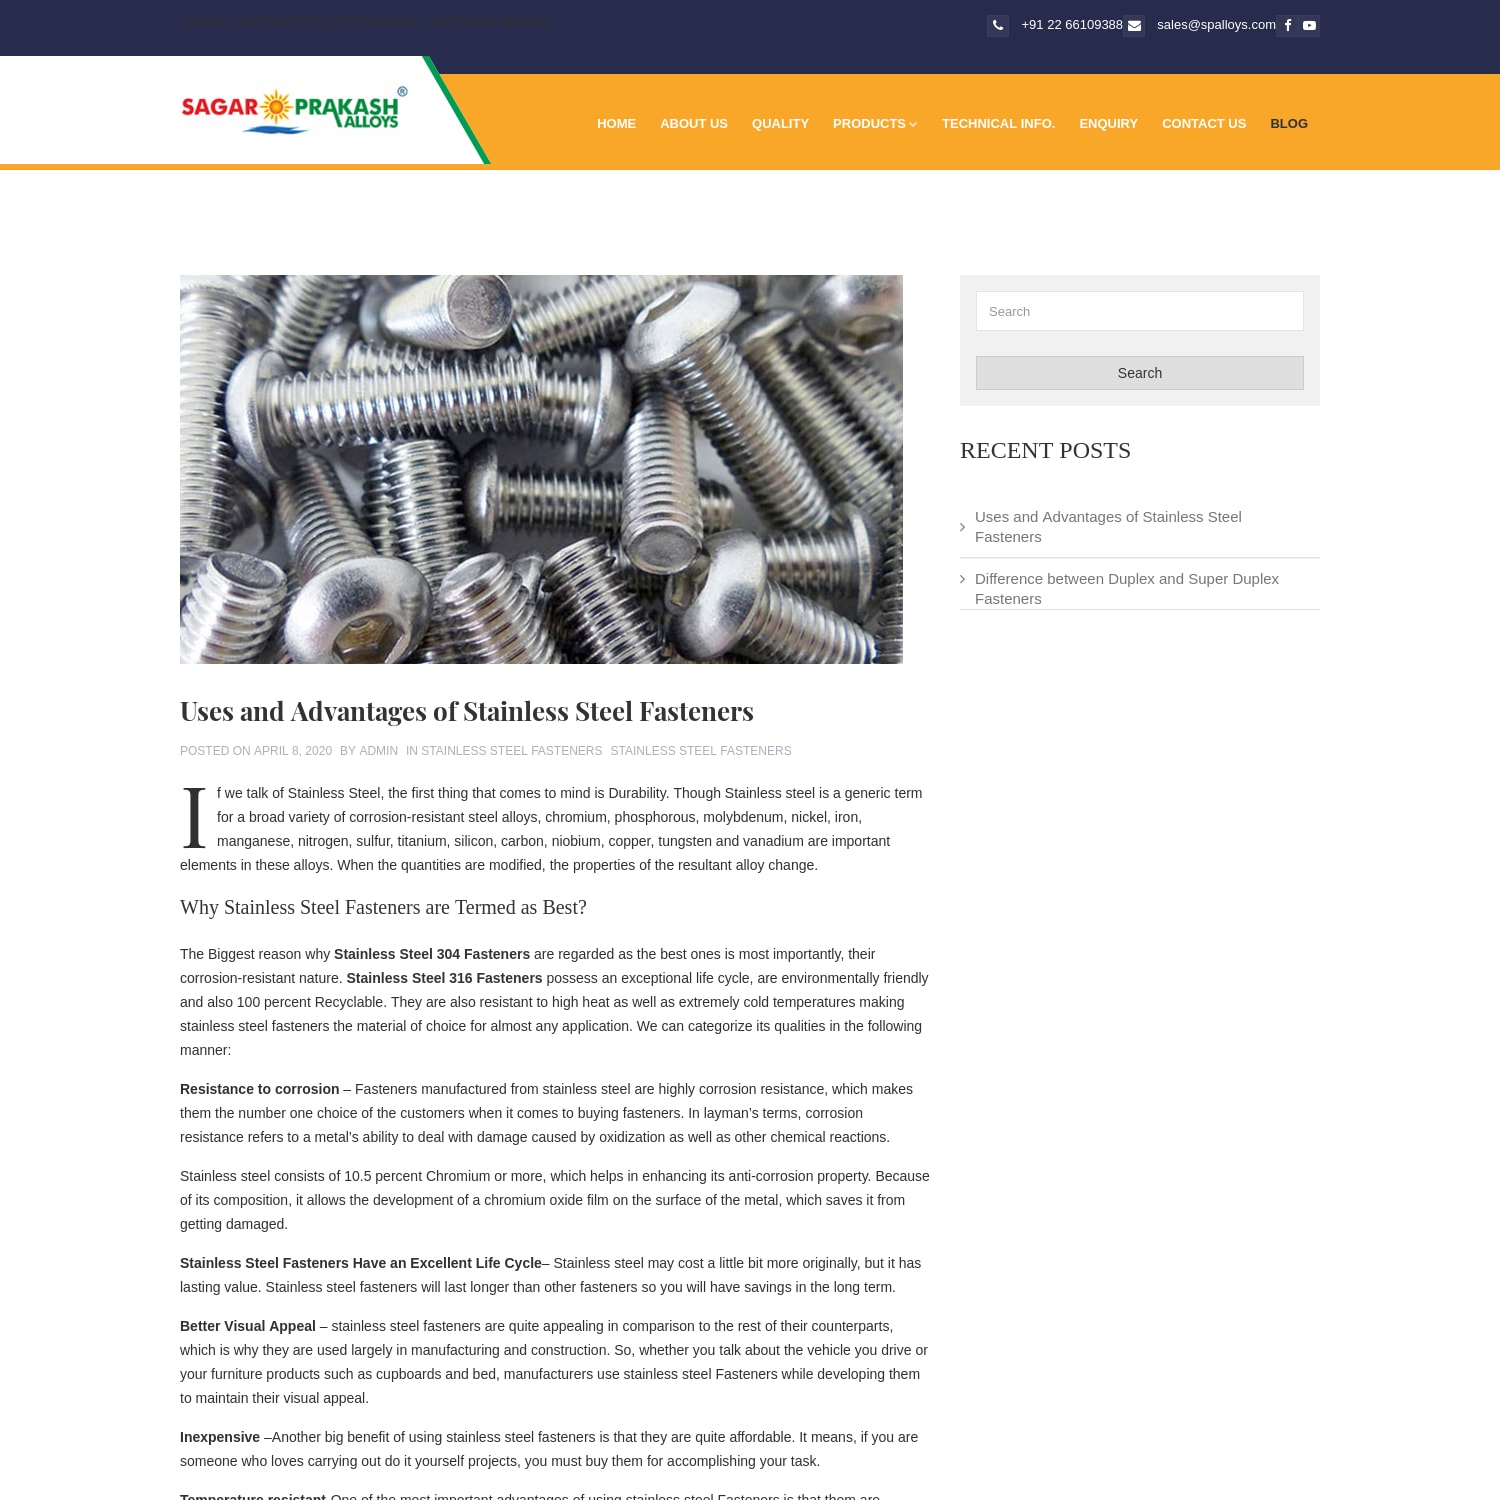 Uses and Advantages of Stainless Steel Fasteners - Sagar Prakash Alloys Blog